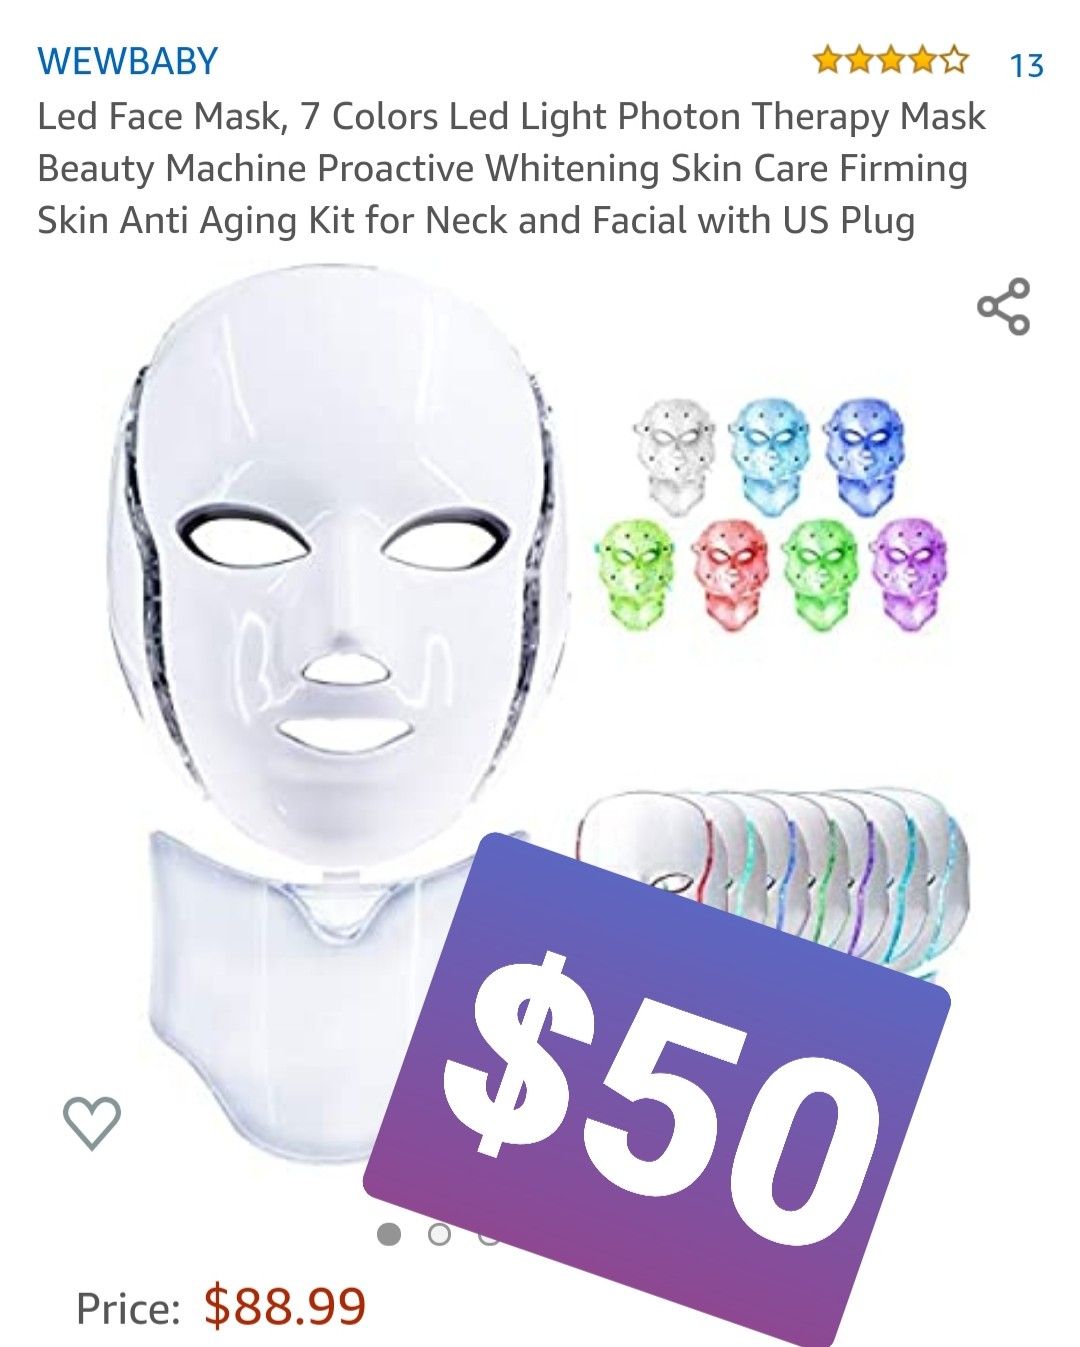 Led Face Mask, 7 Colors Led Light Photon Therapy Mask Beauty Machine Proactive Whitening Skin Care Firming , Mascaria